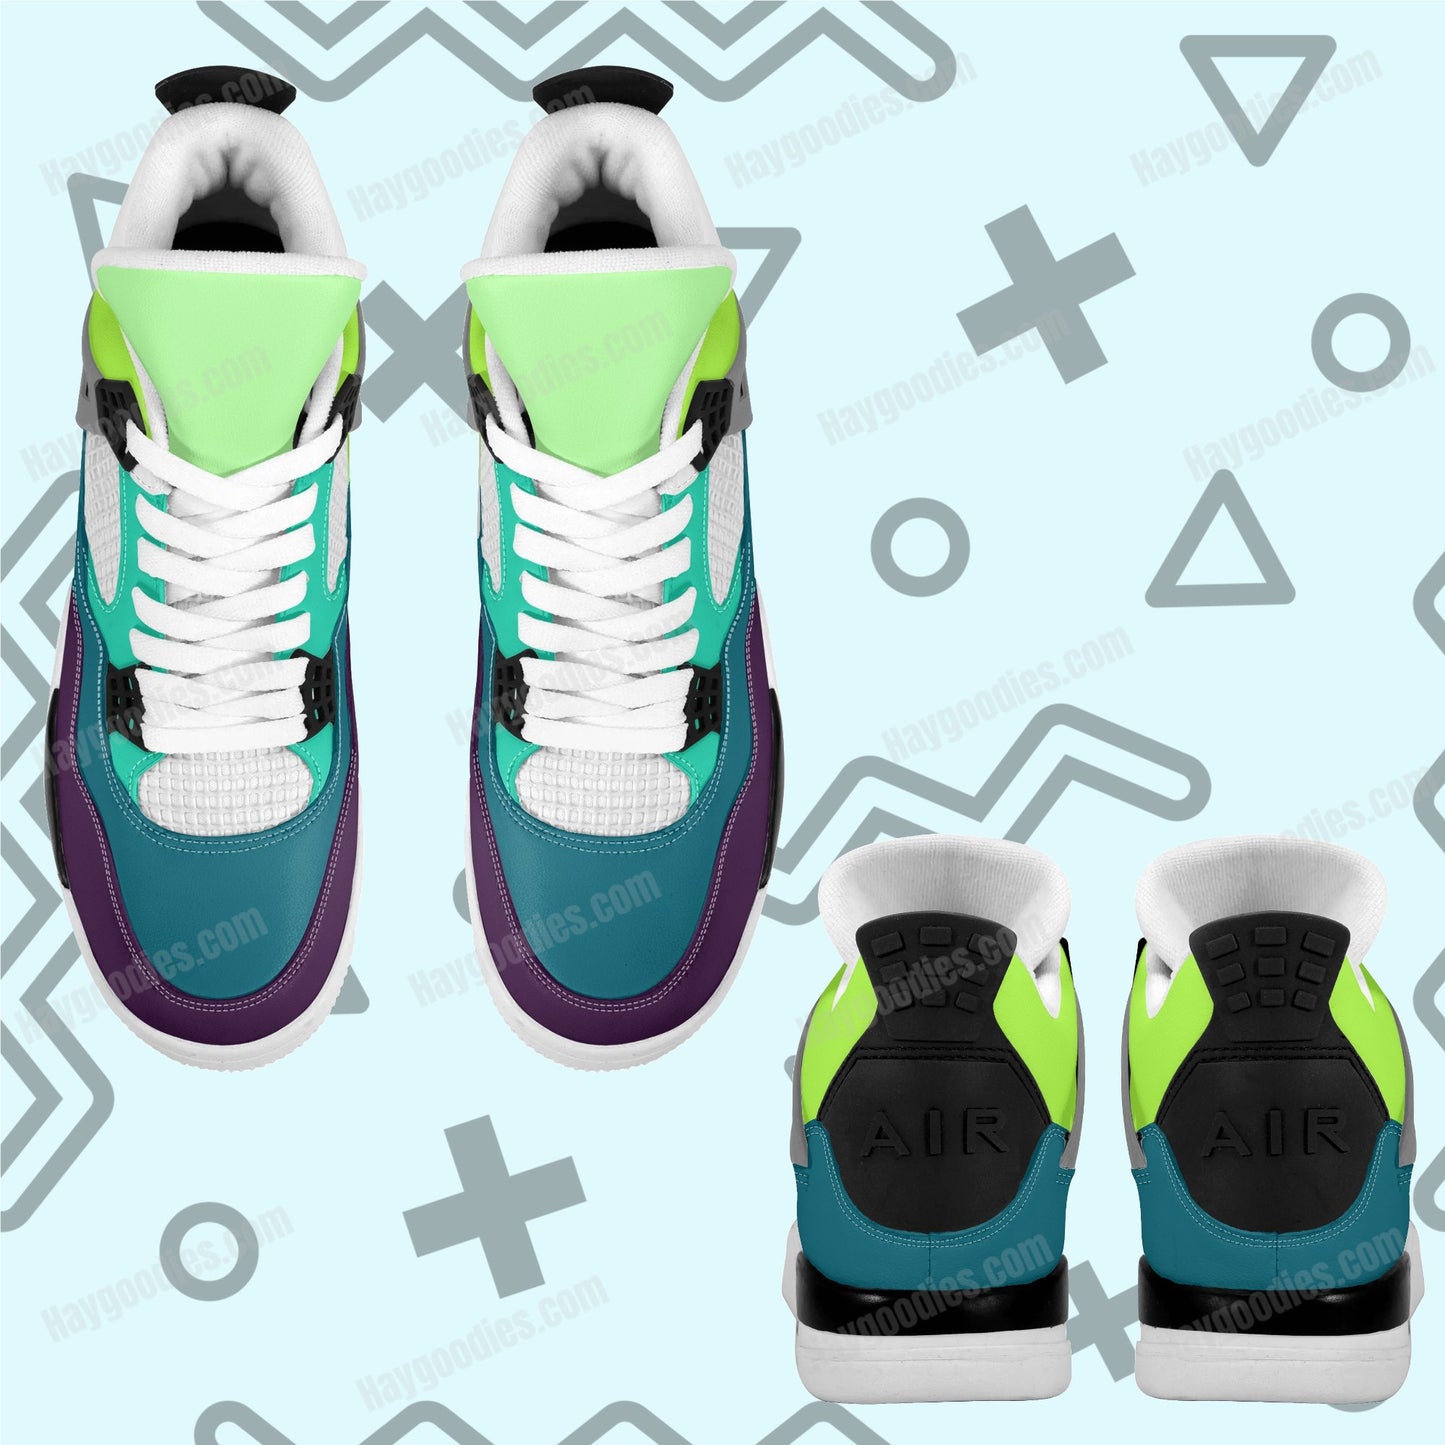 Teal and Green Low Top Retro J4 Style Sneakers